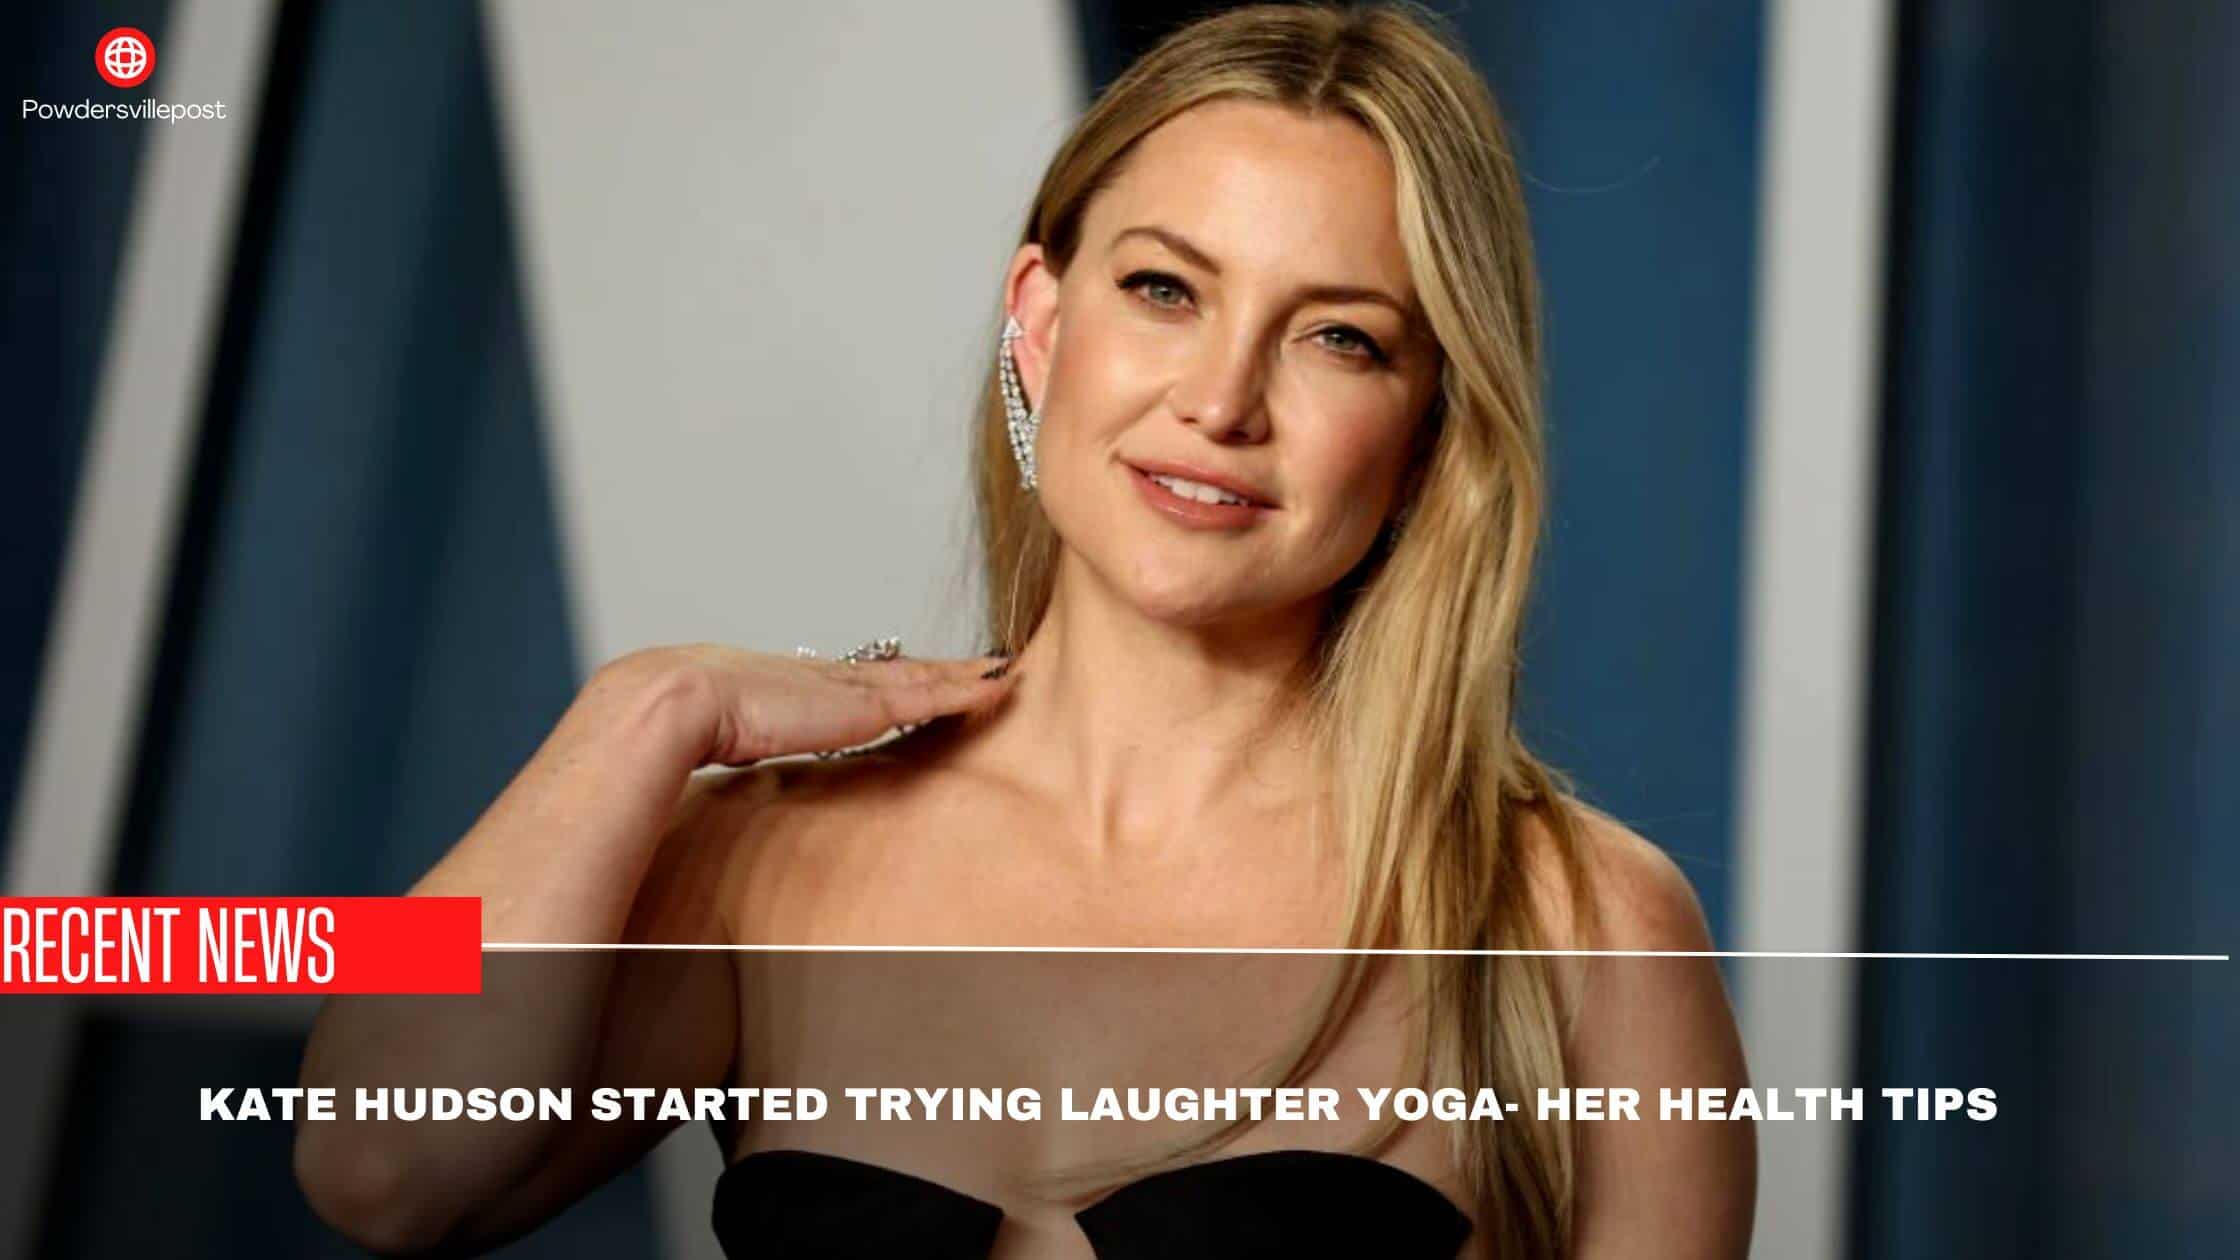 Kate Hudson Started Trying Laughter Yoga- Her Health Tips